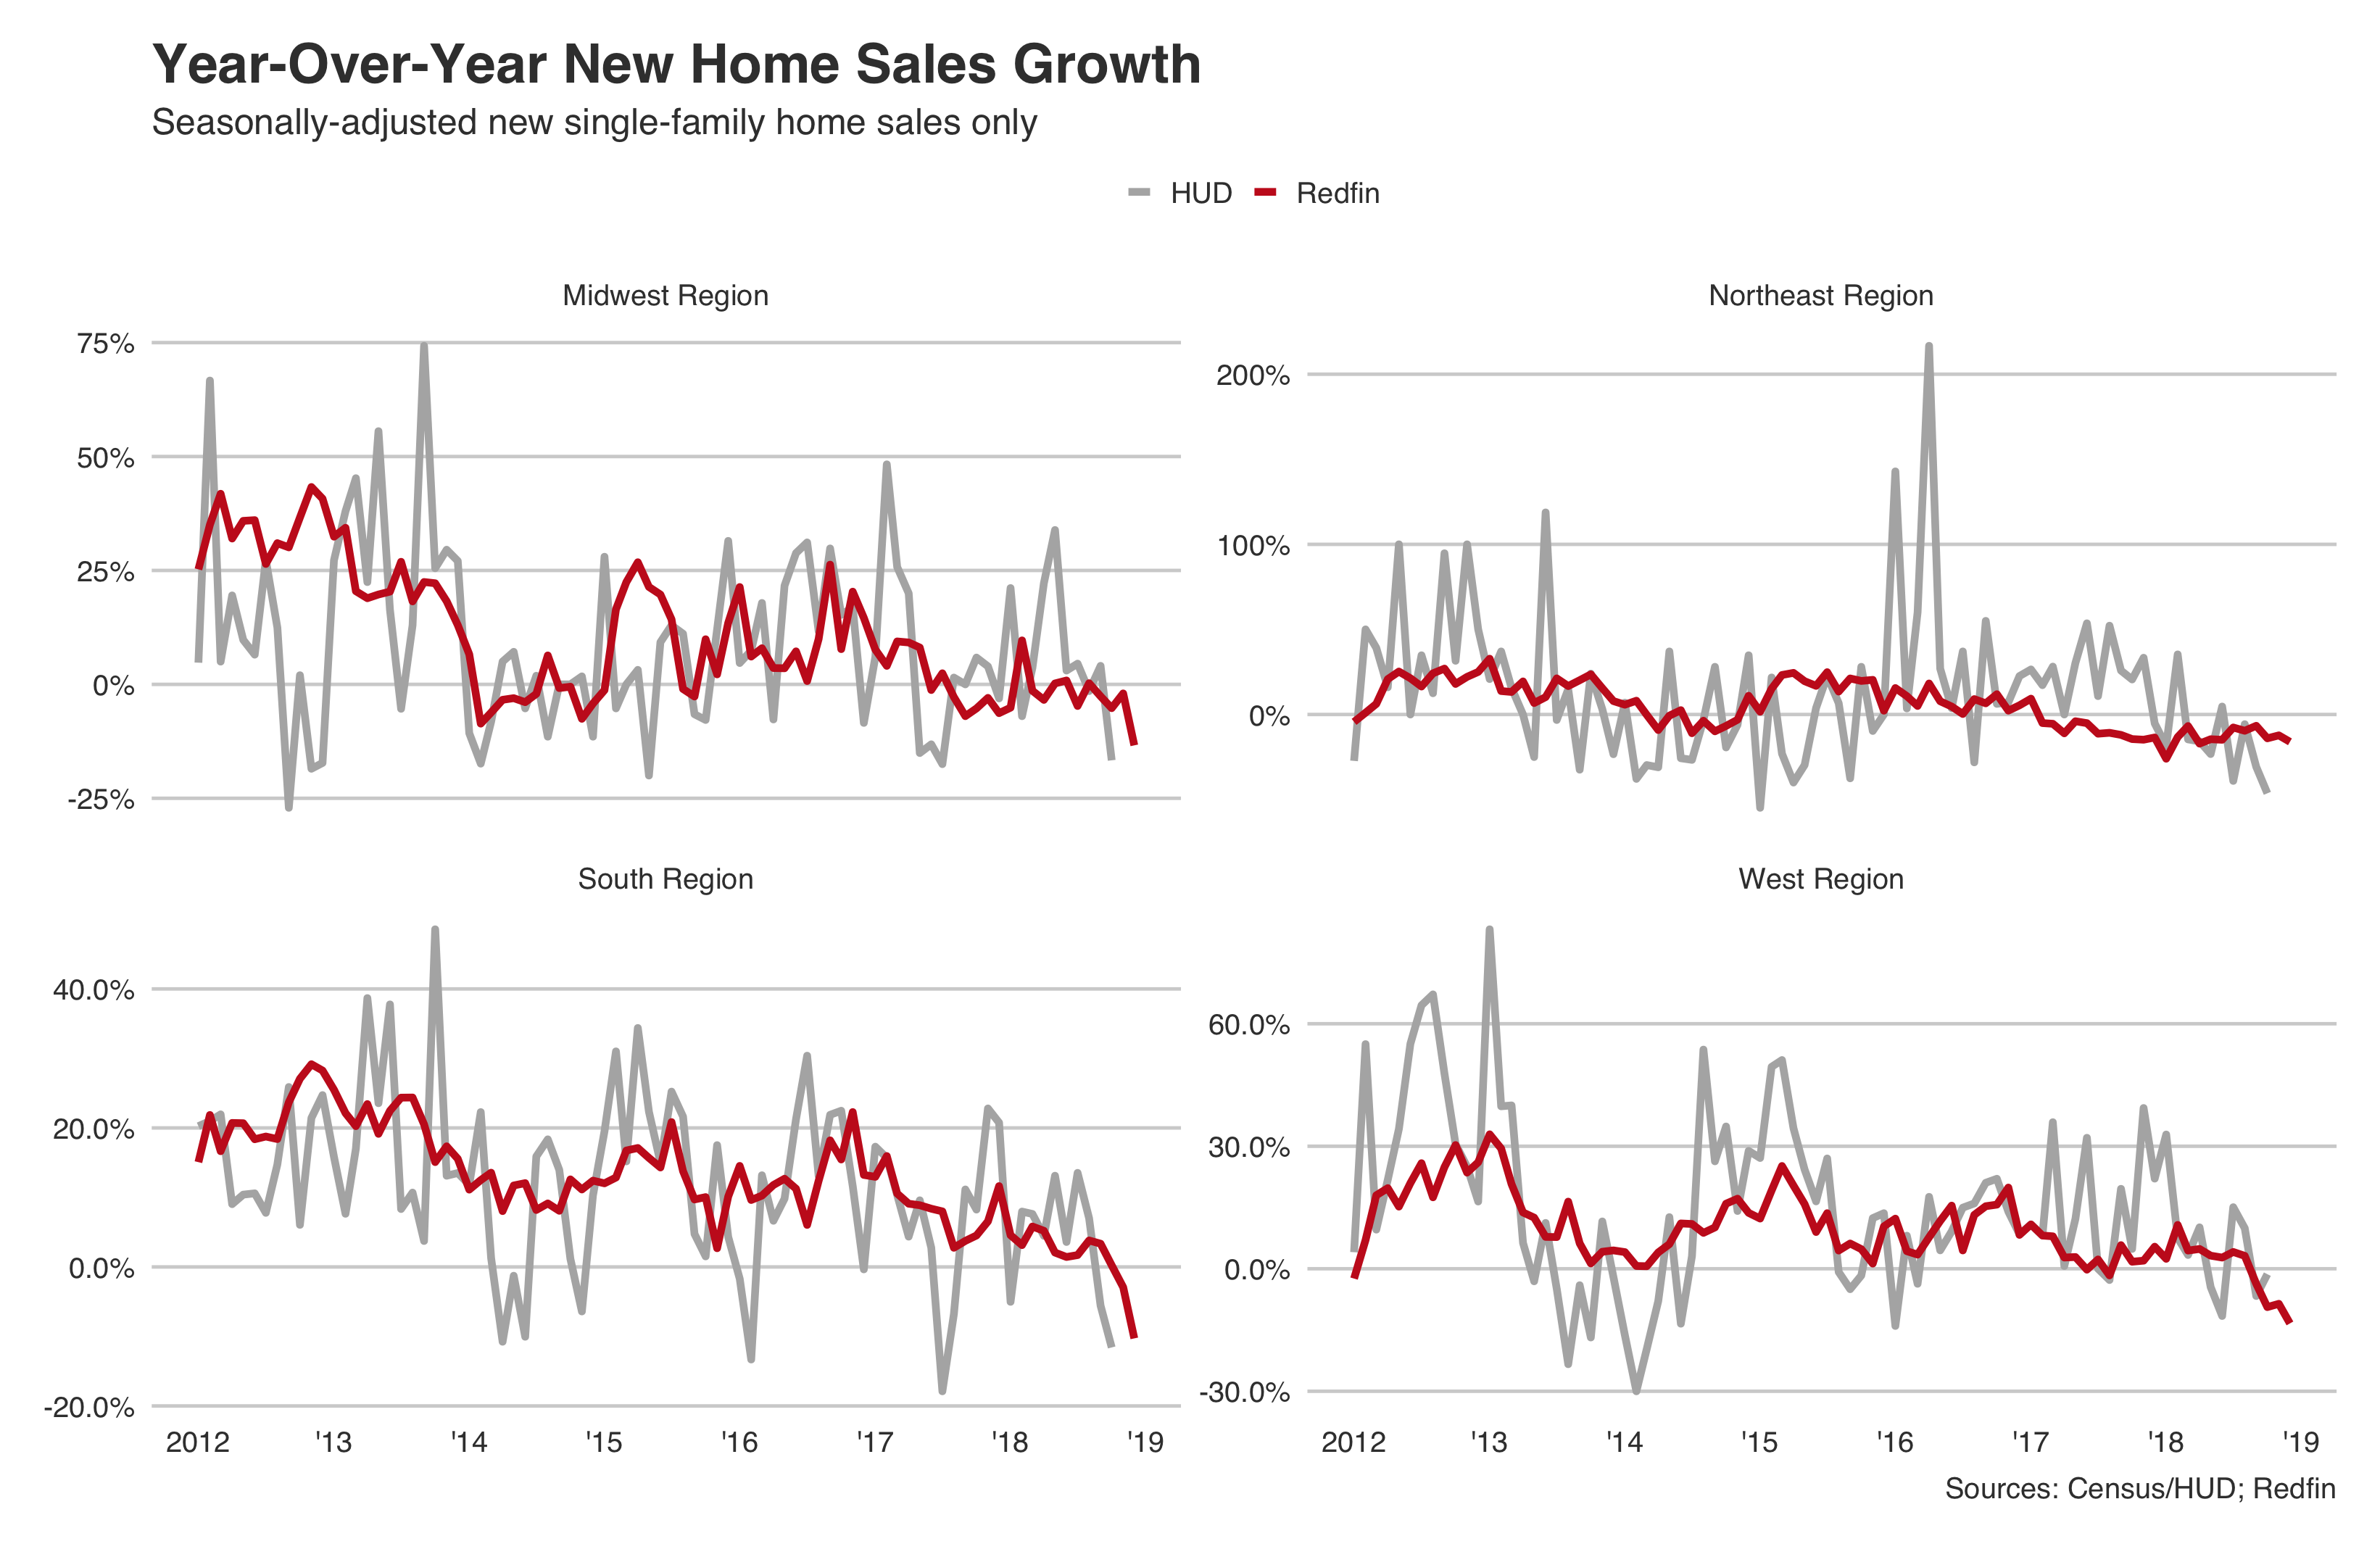 YoY new-home sales growth